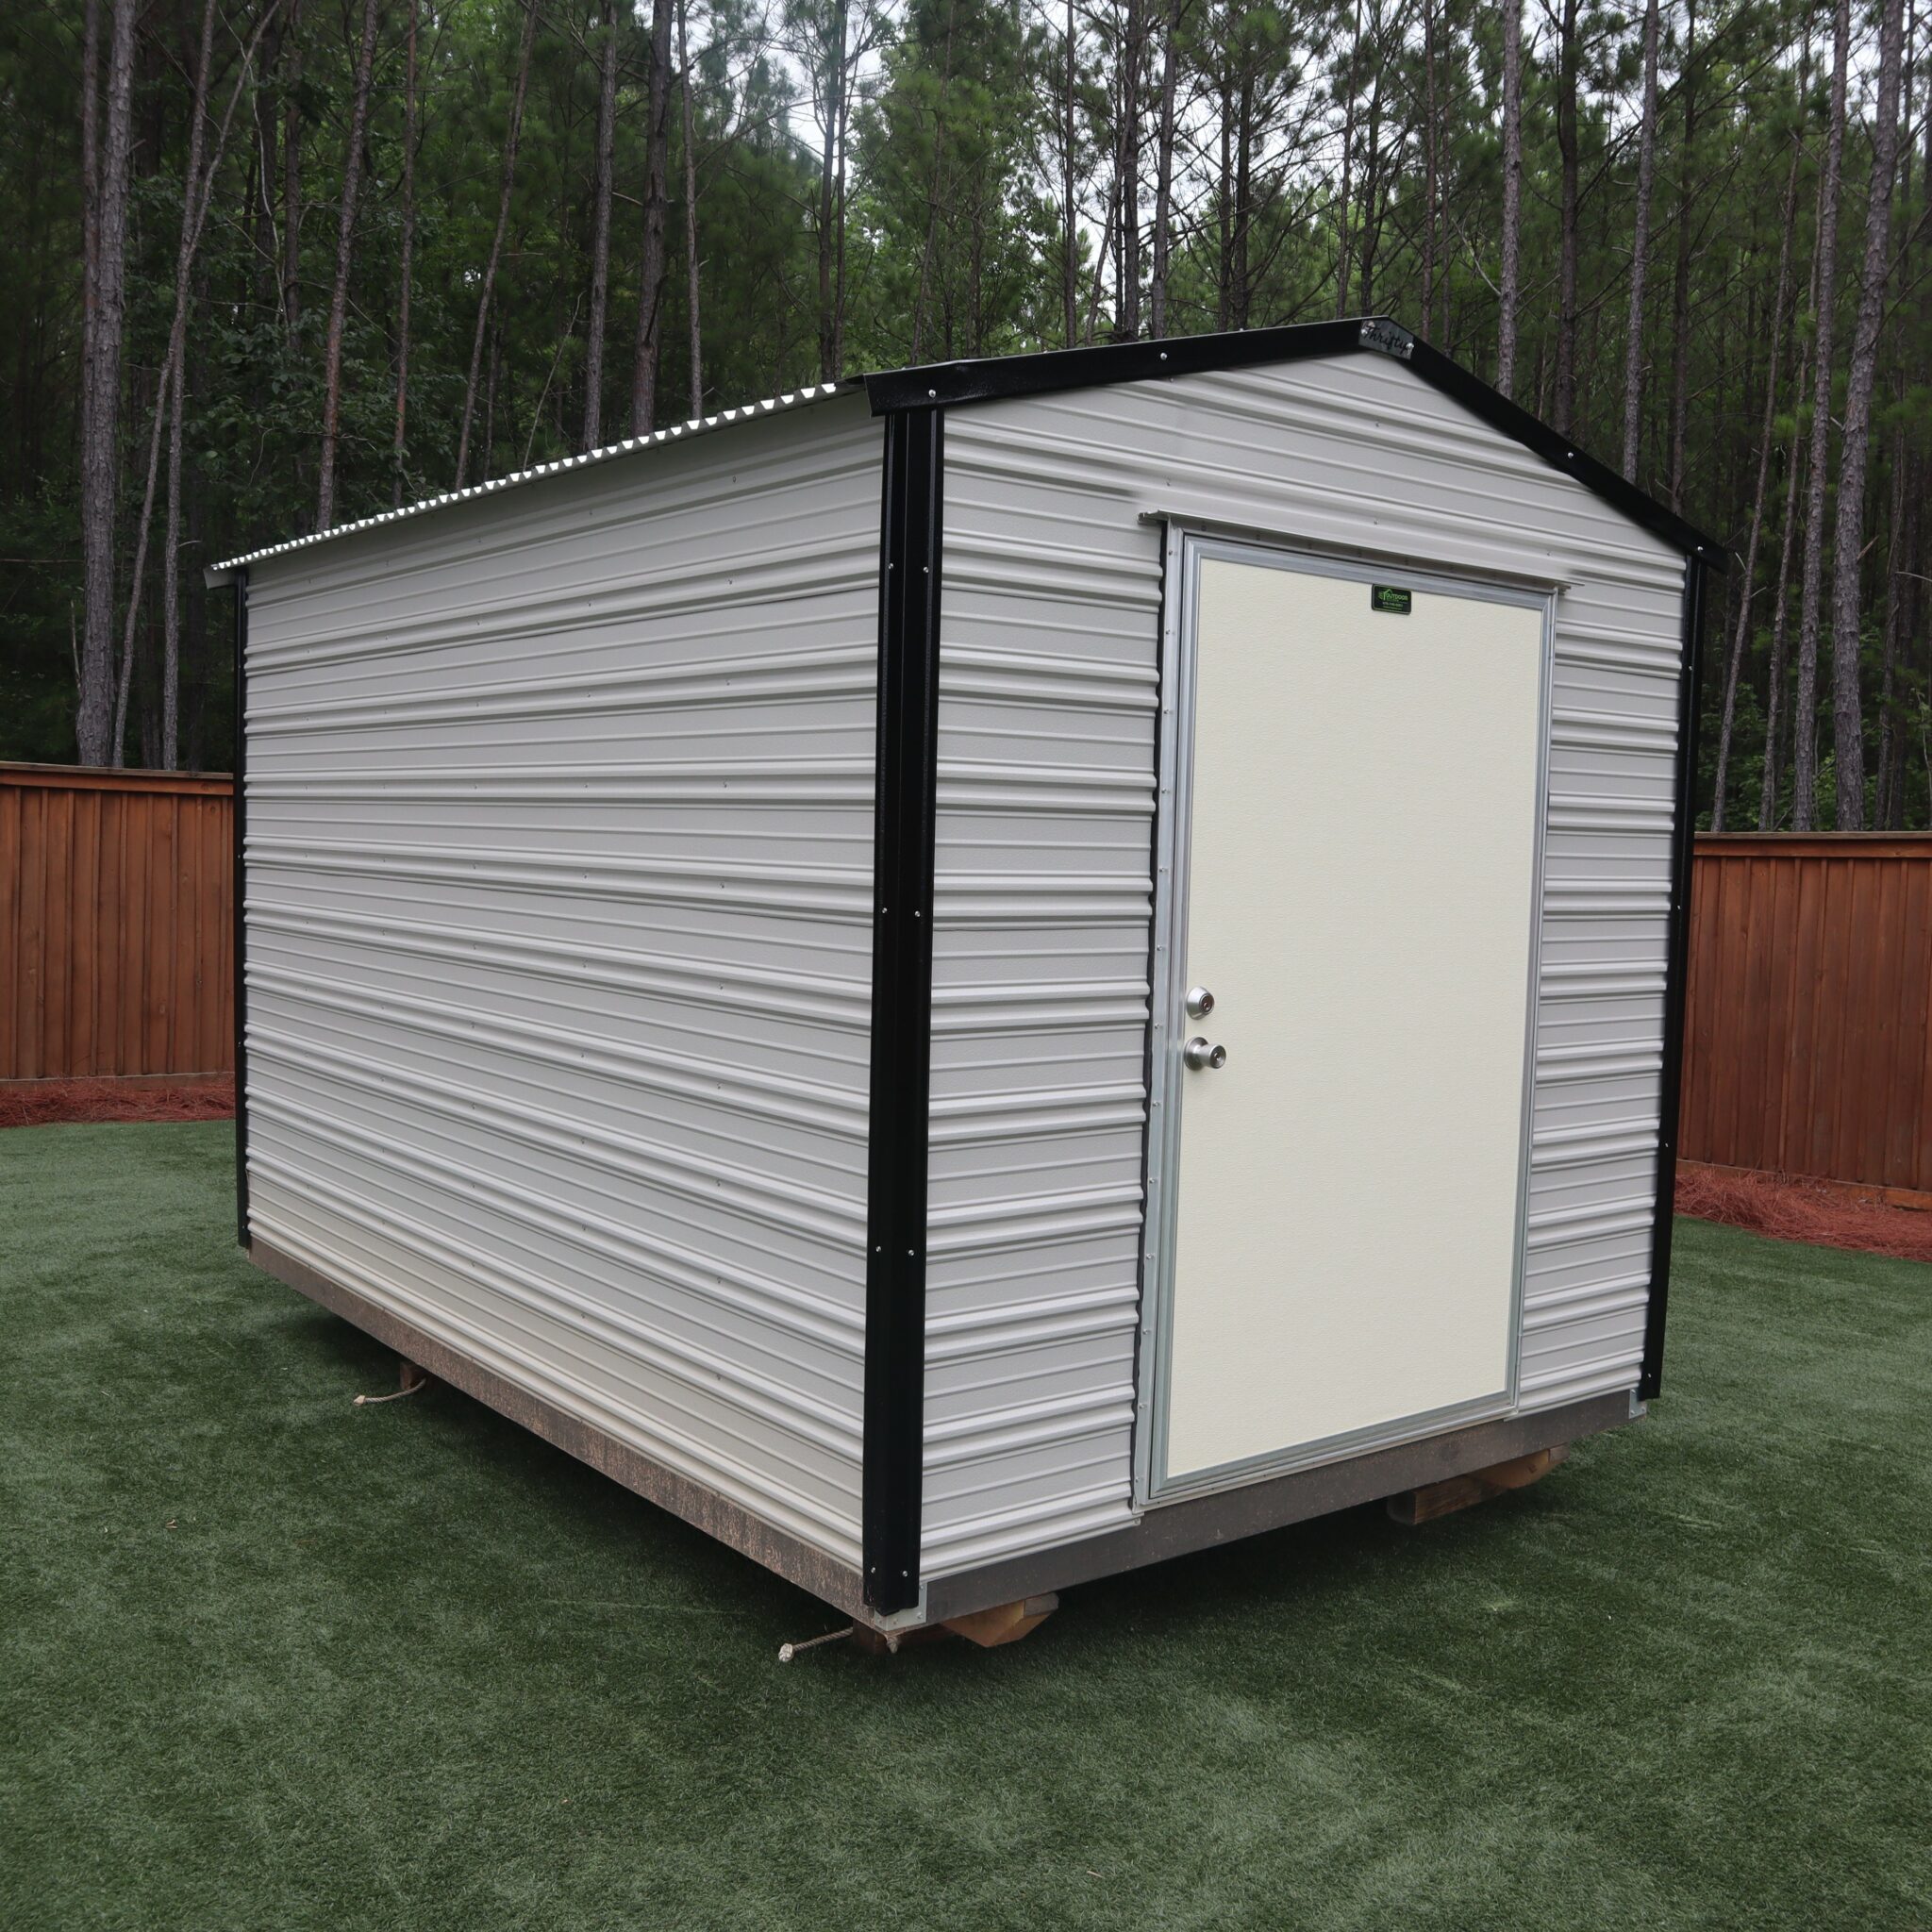 OutdoorOptions Eatonton Georgia 31024 Shed Picture Replace 145 Storage For Your Life Outdoor Options